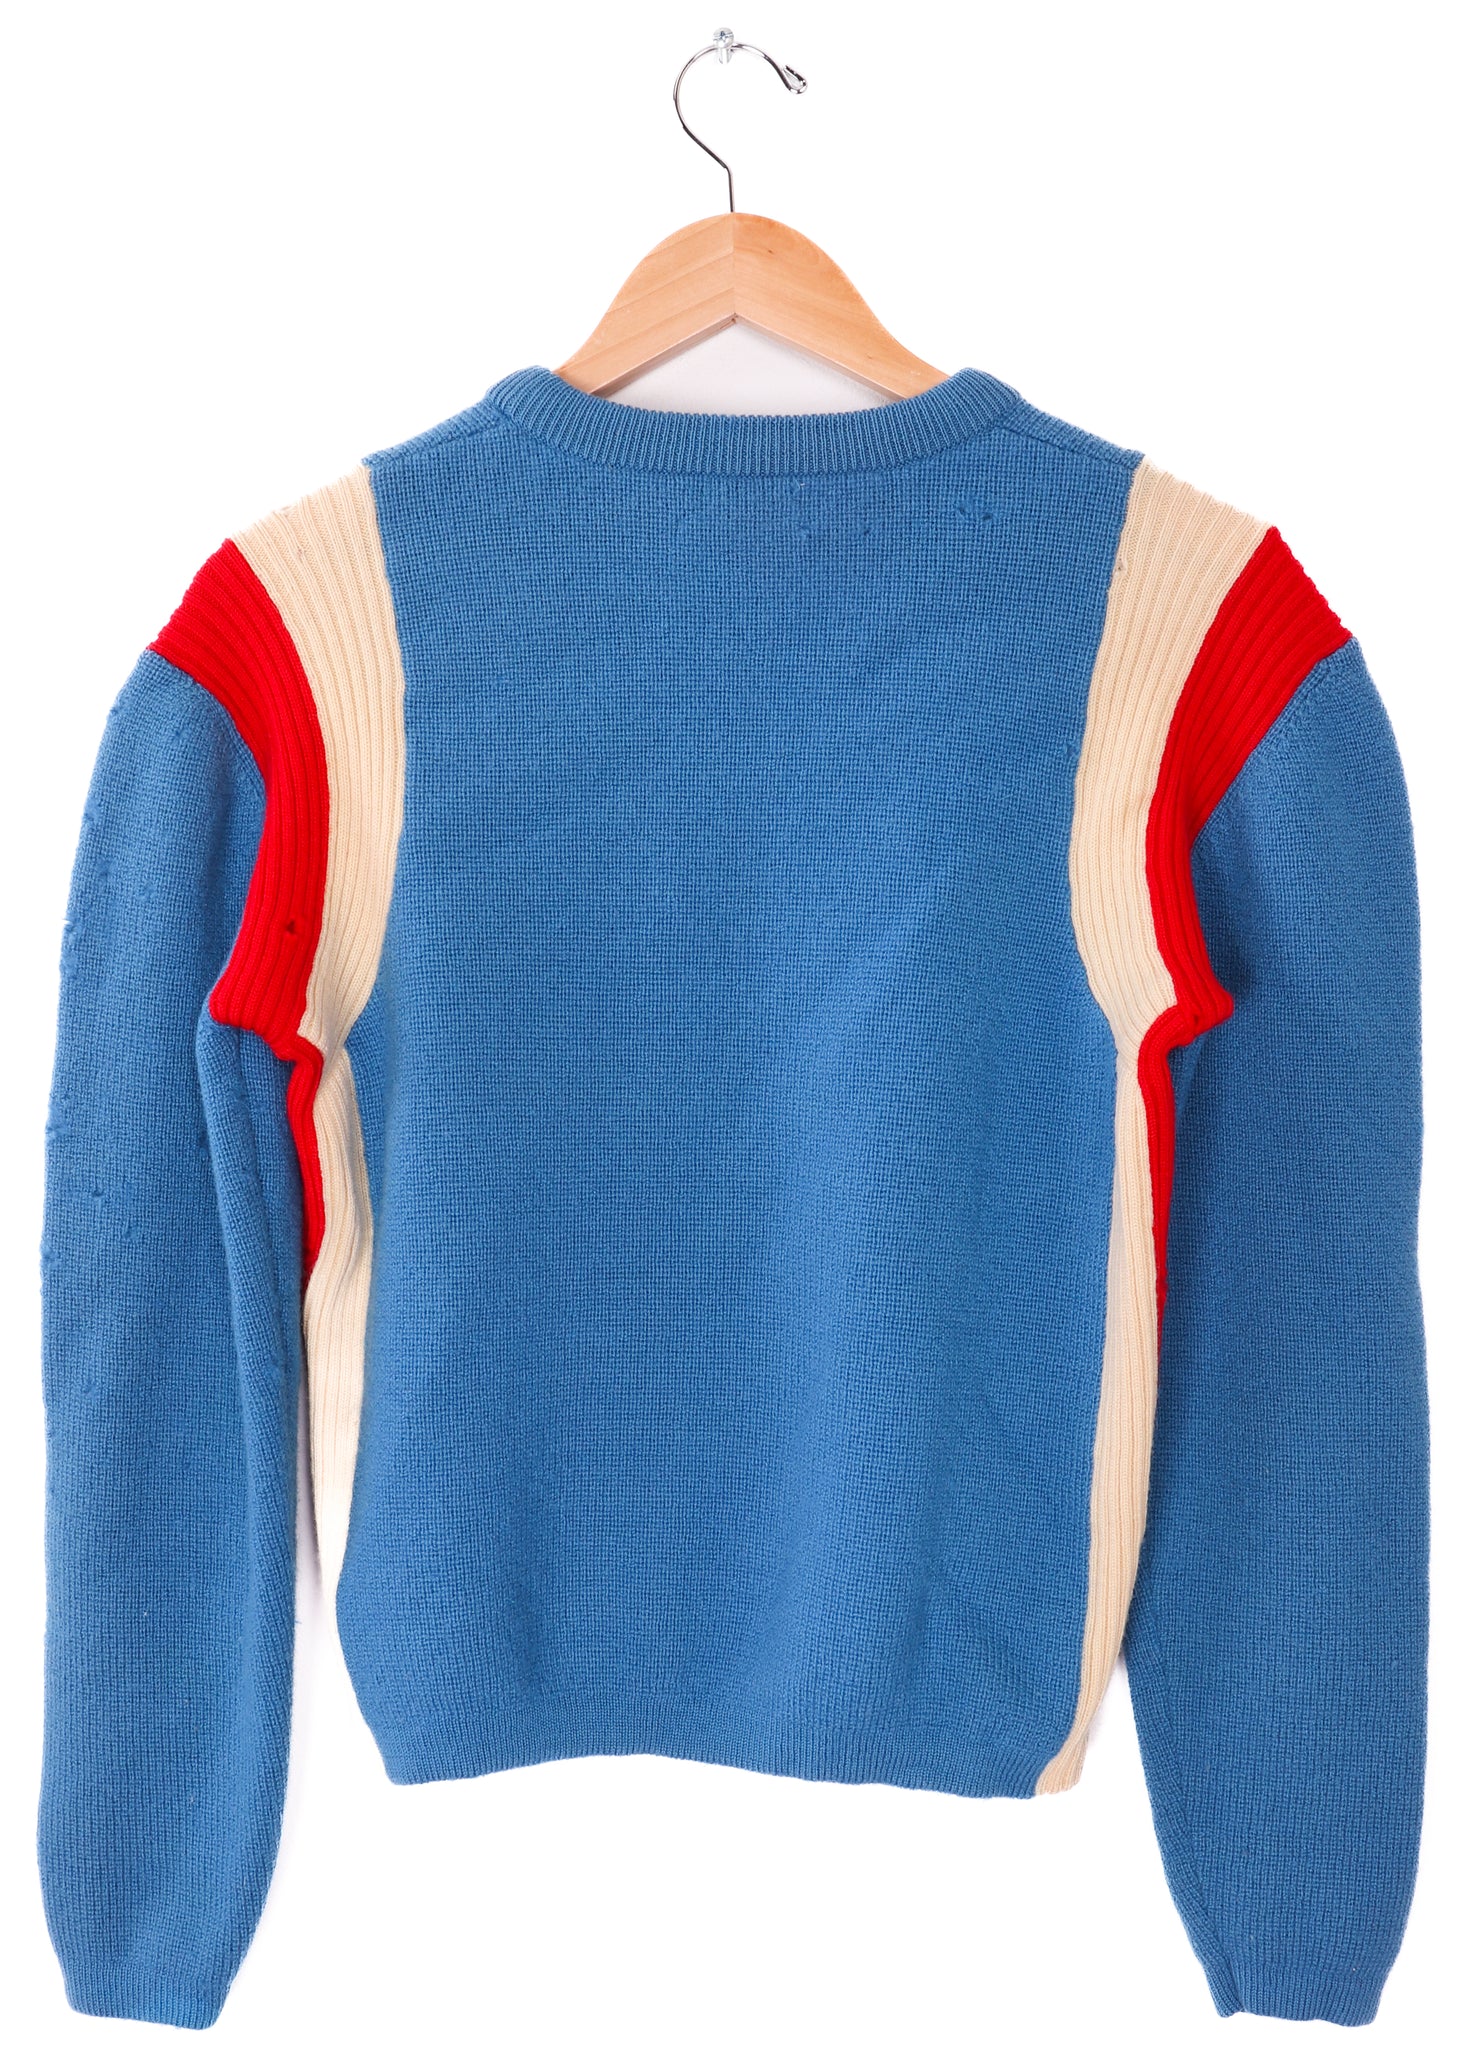 70s White Stag Blue Sweater